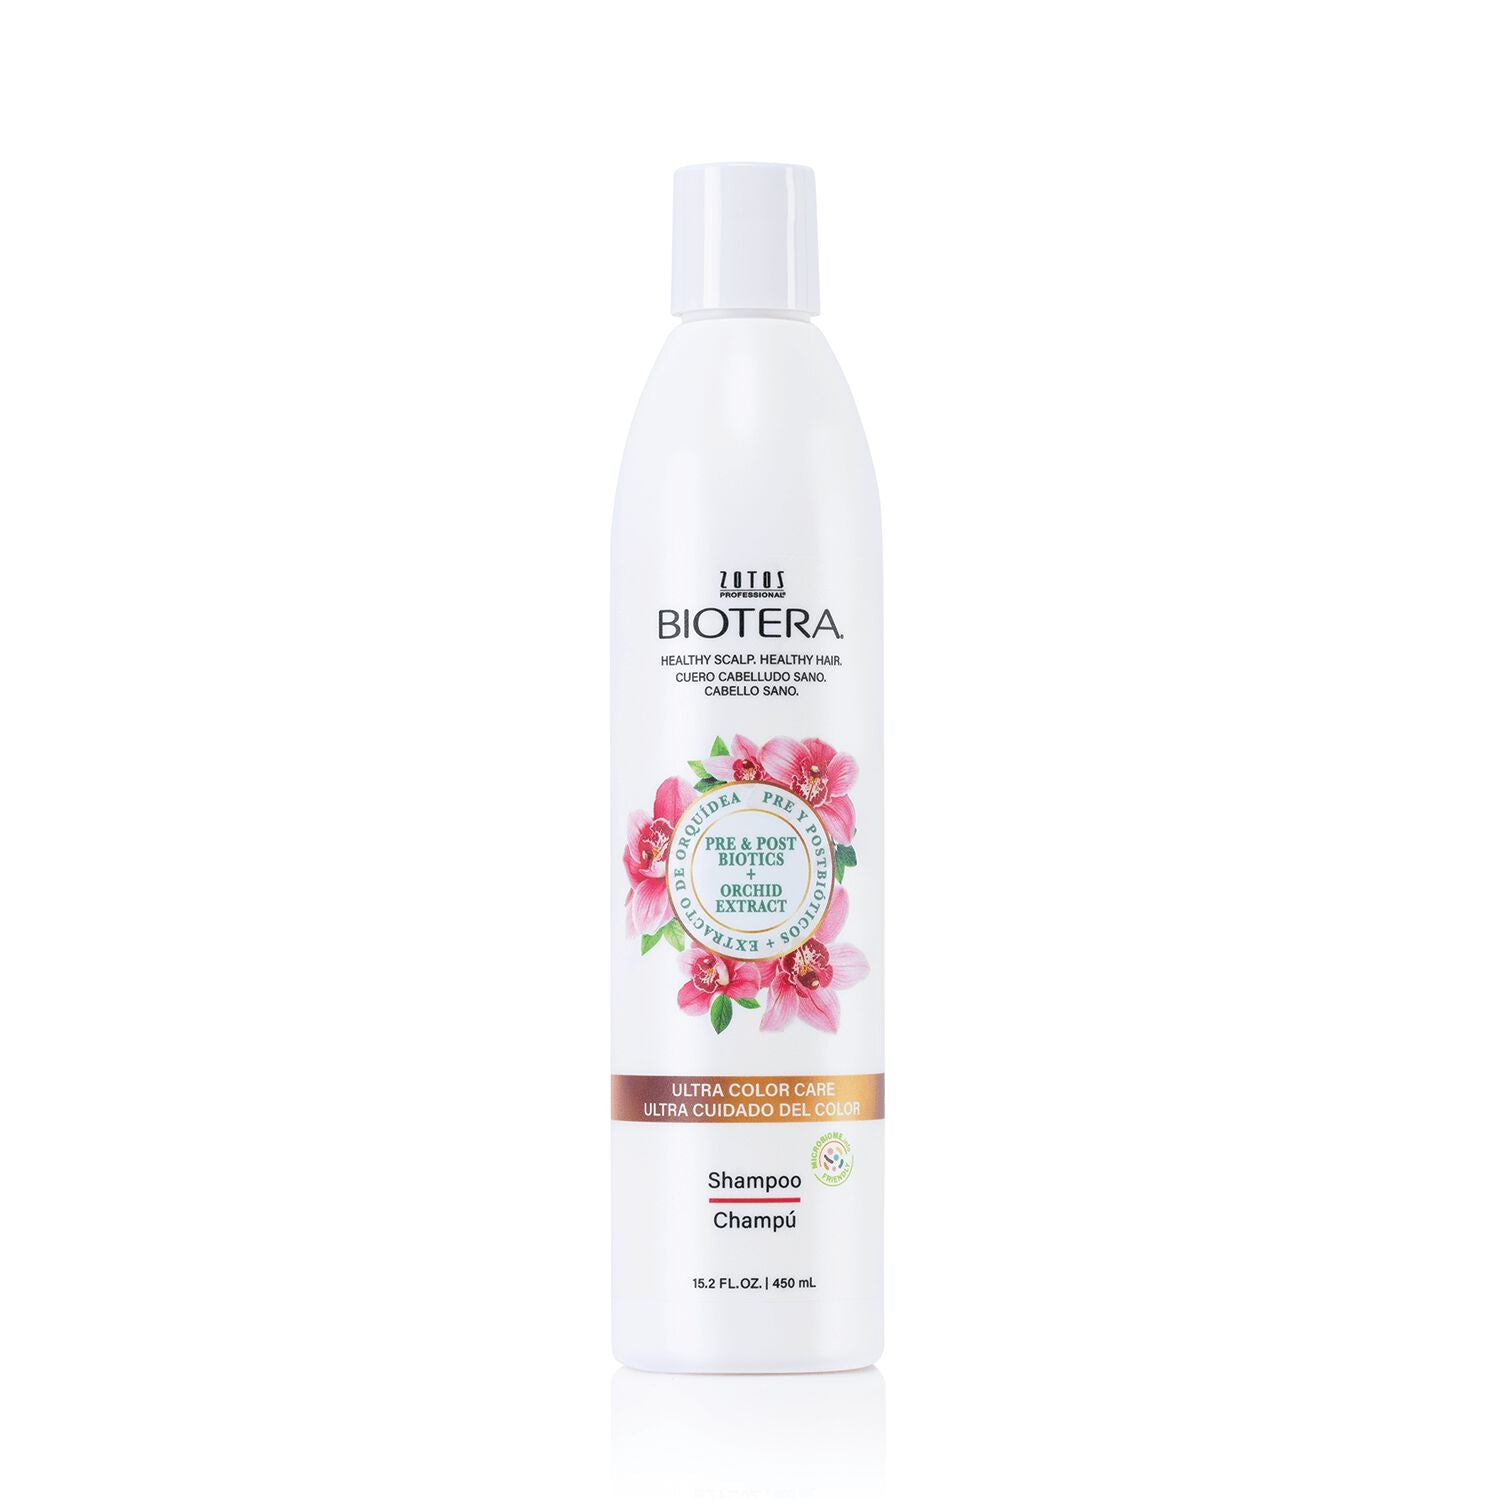 Biotera Ultra Color Care Shampoo With Orchid Extract 15.2 oz